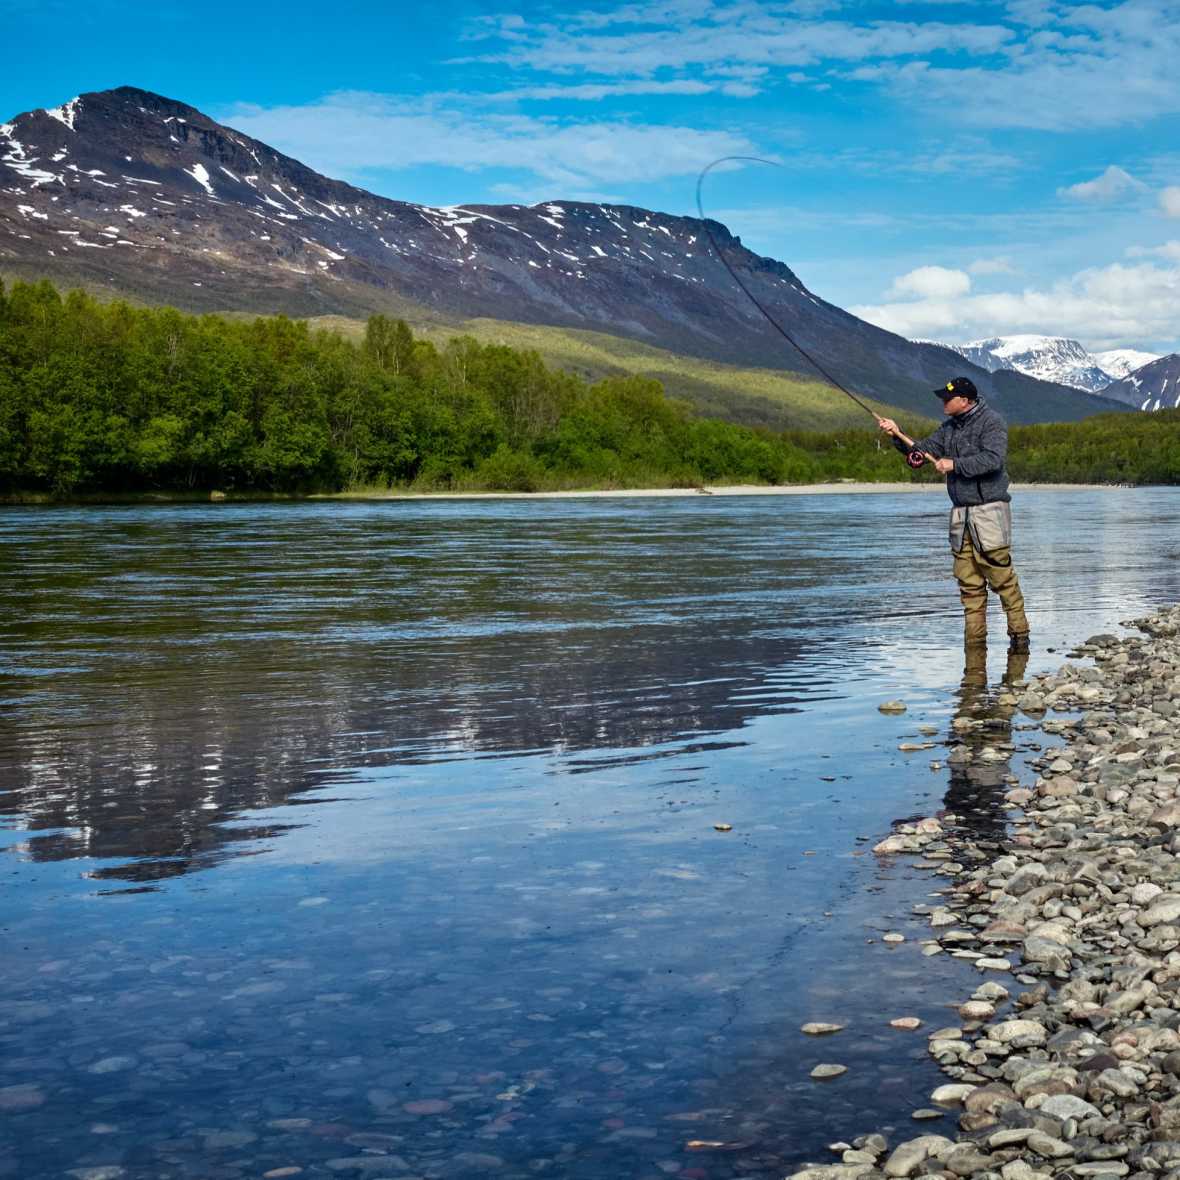 River fishing secrets from a pro, with David Irvine